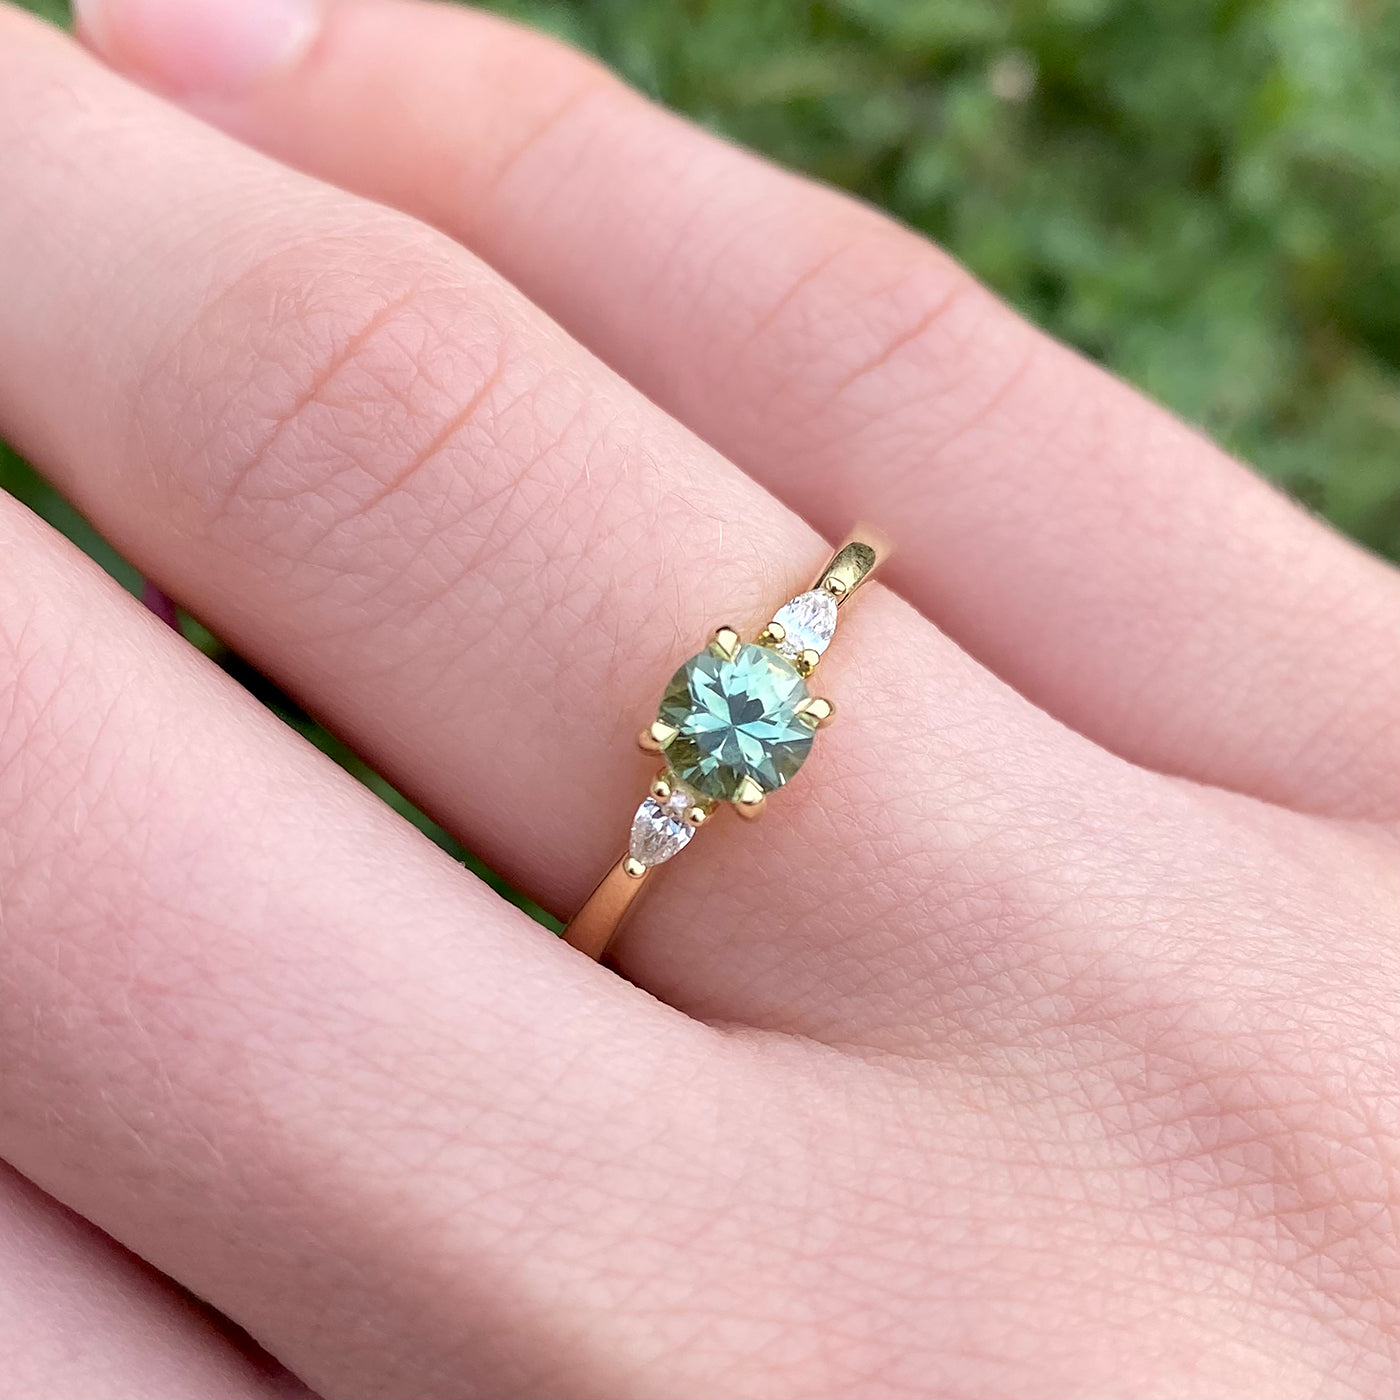 Mint Green Sapphire & Diamond Trilogy Engagement Ring (Size M 1/2, Resized K 1/2 to O 1/2)